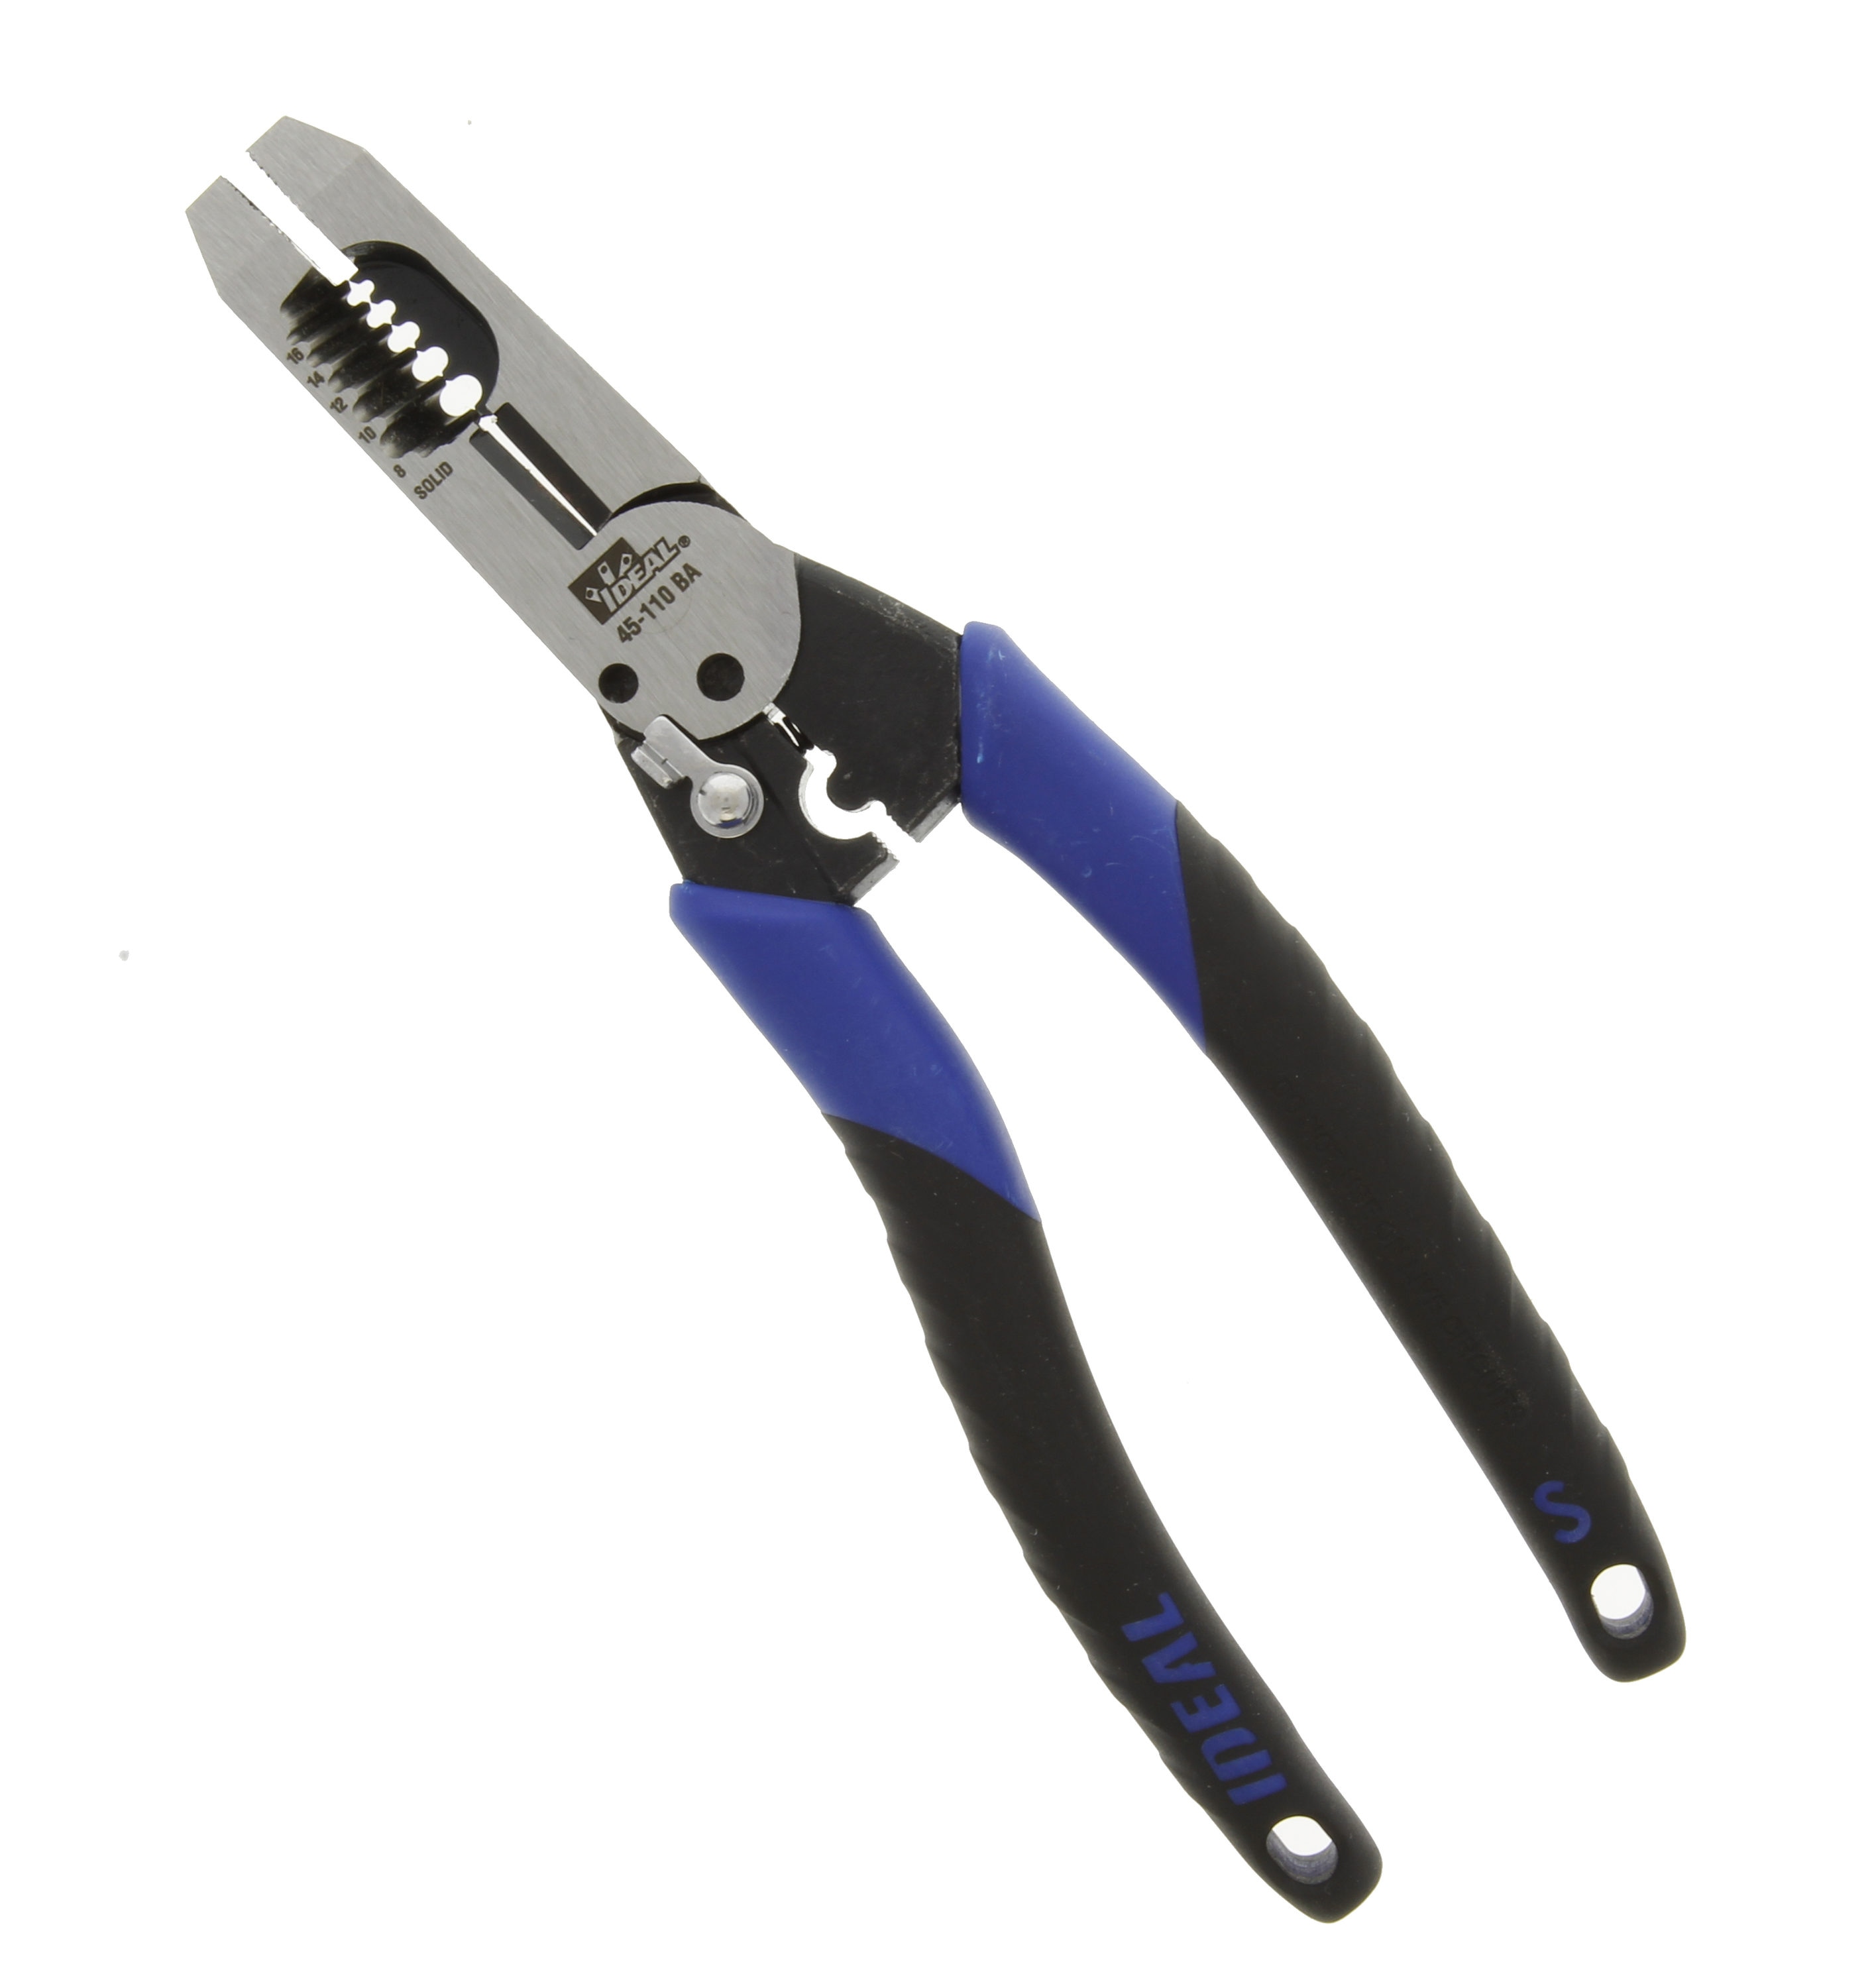 KAIWEETS KWS-105 Electrical Wire Stripper Wire Plier with Screw Cutter